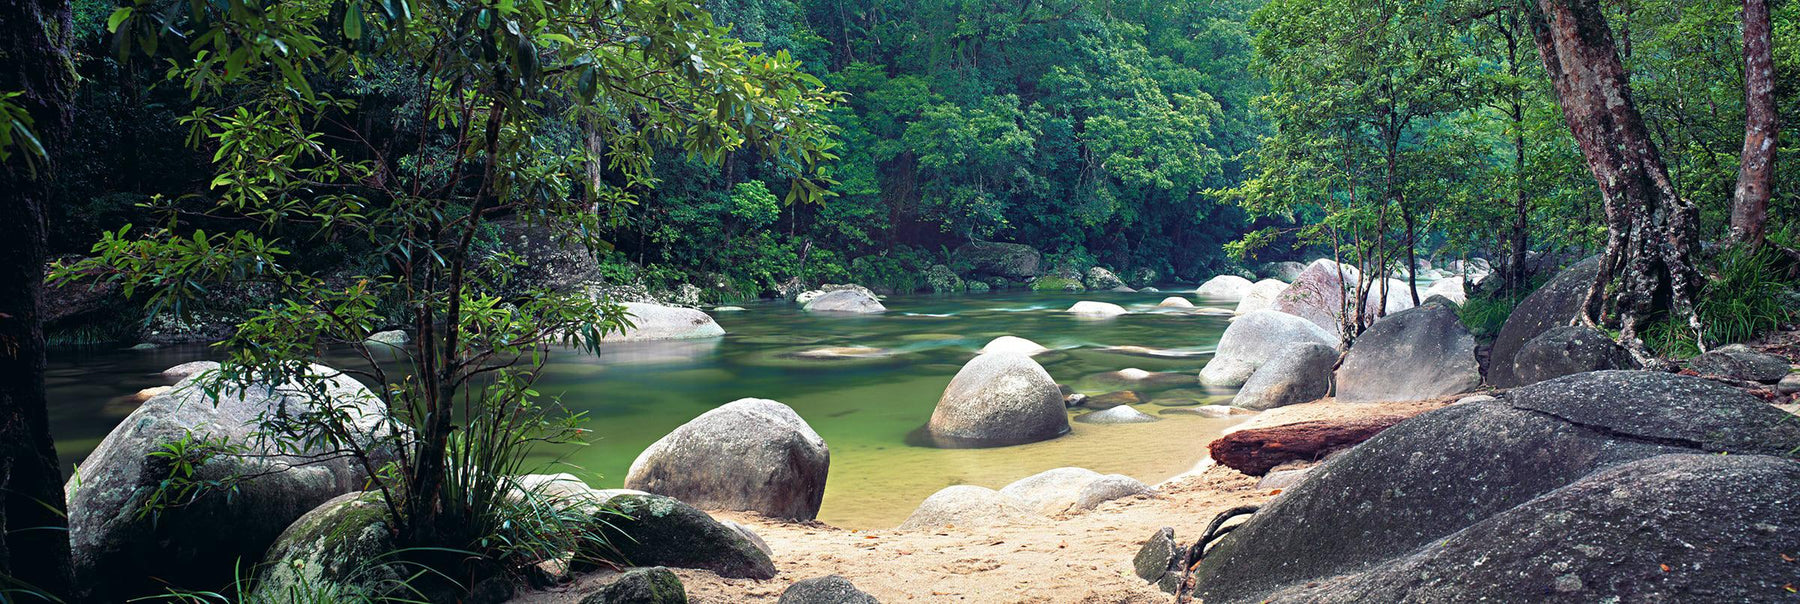 Rock and sand shore of the river running through the tropical rainforest of Mossman Gorge Australia